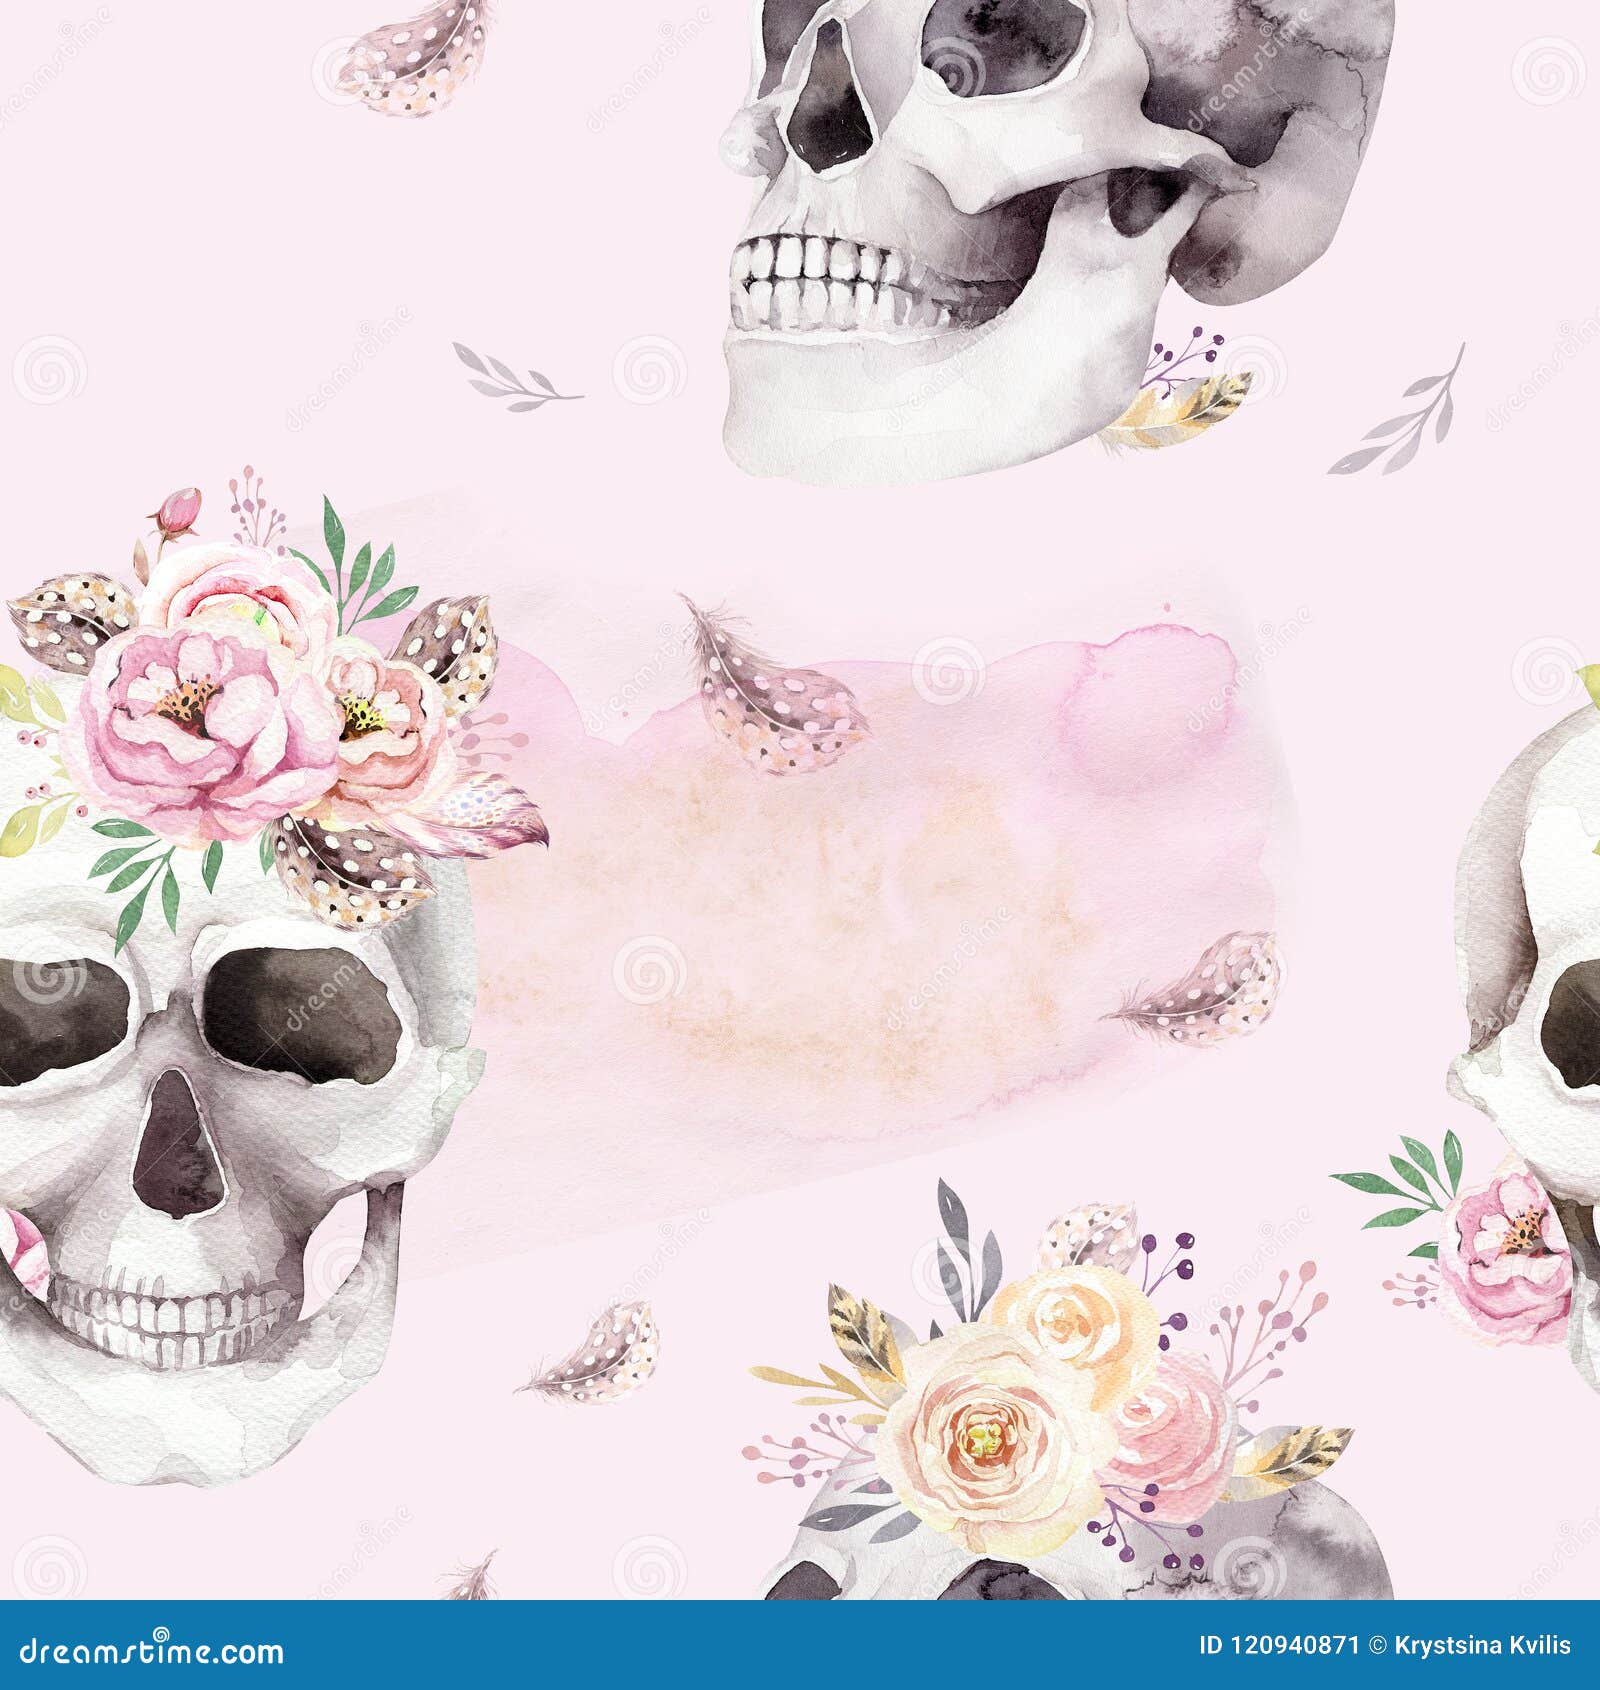 Vintage Watercolor Patterns with Skull and Roses, Wildflowers, Hand ...